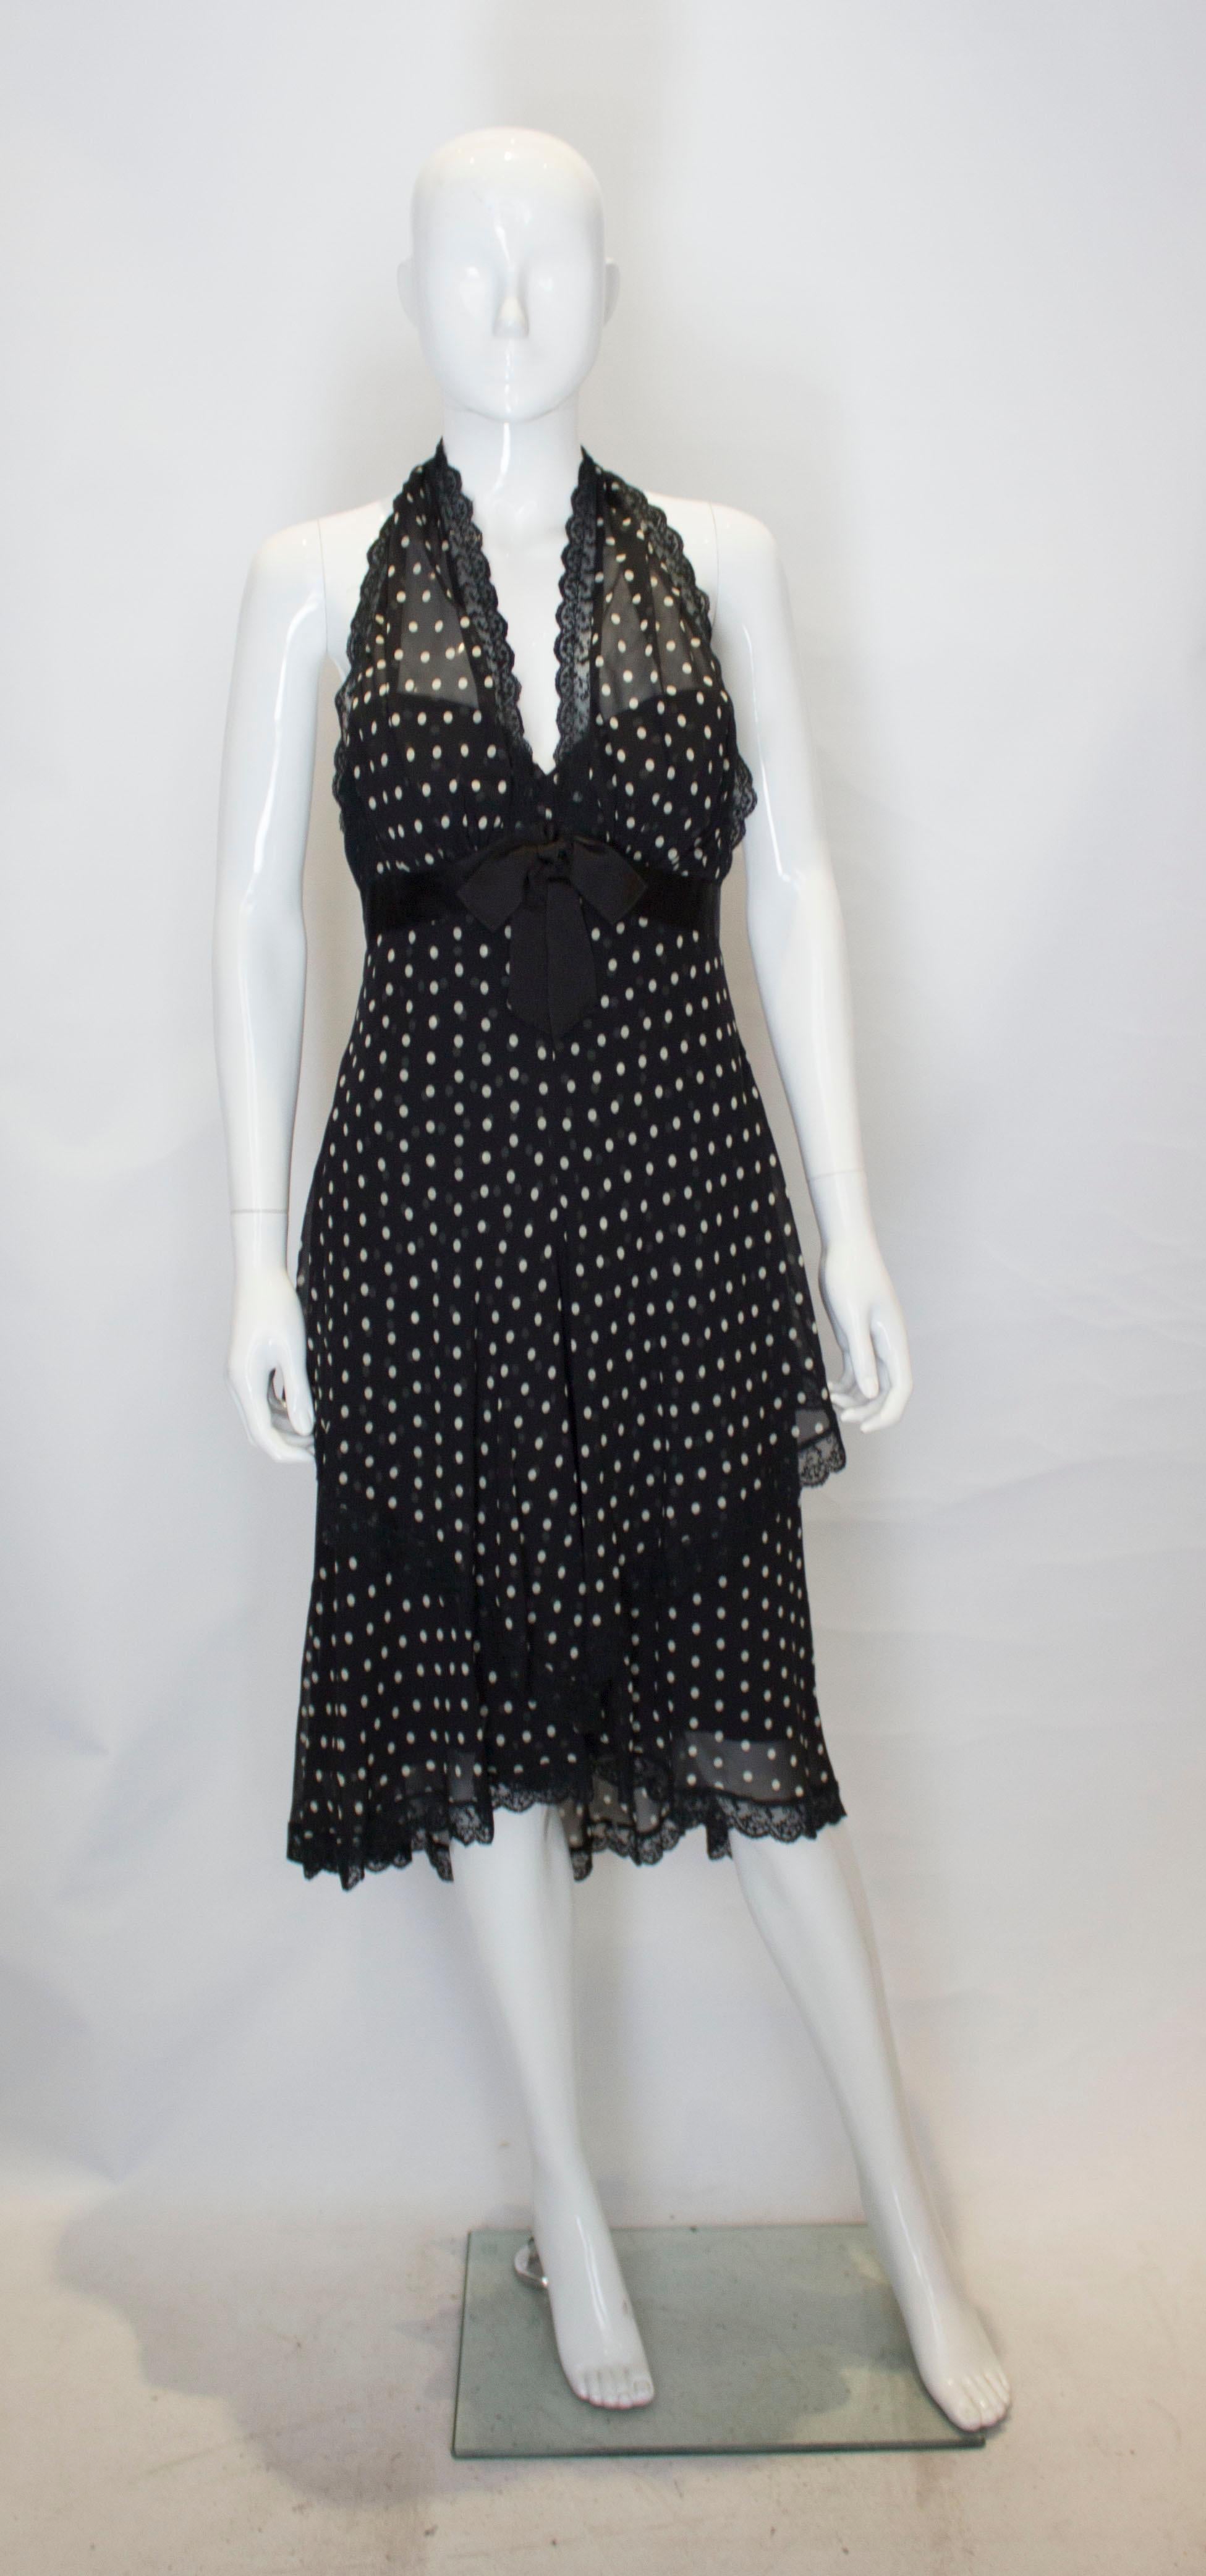 A pretty and chic  vintage silk dress by Bellville Sassoon,Lorcan Mullany. The dress is silk lined and has self fabric buttons , and a halter neck with lace trim .There is a bow detail at the front.